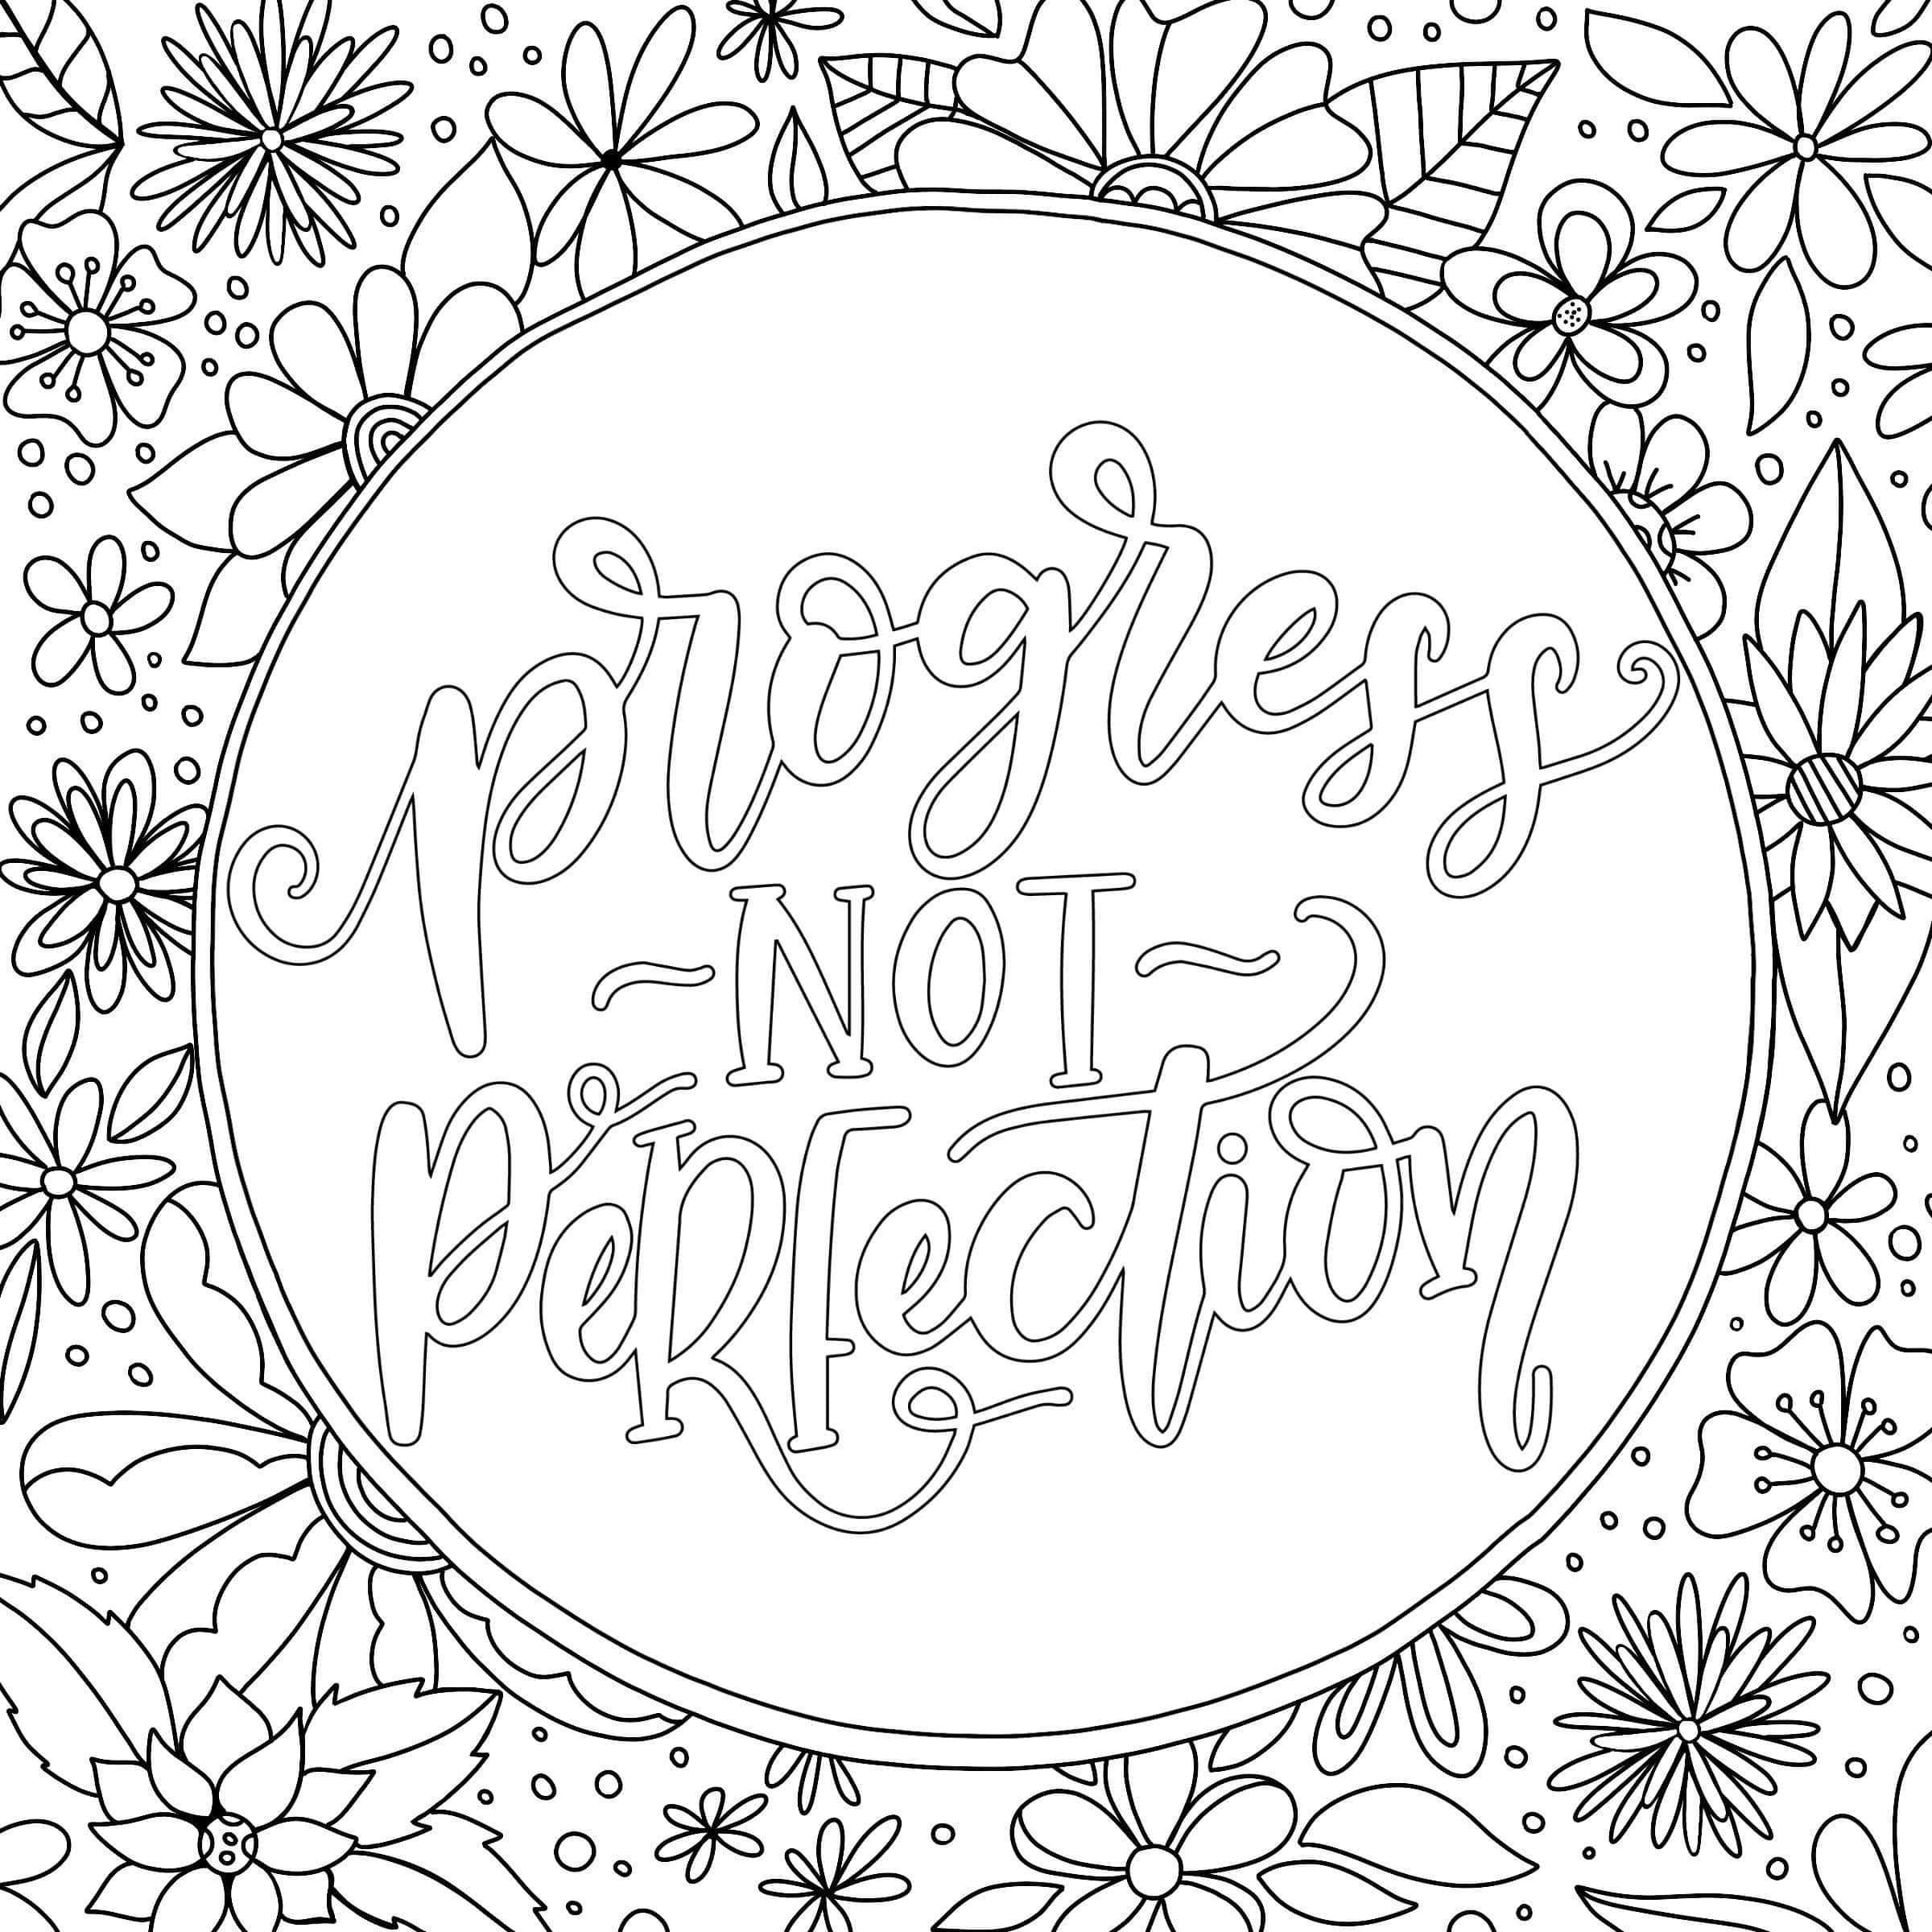 free printable inspirational coloring pages for adults pdf | quote coloring pages for adults | inspirational coloring pages for students